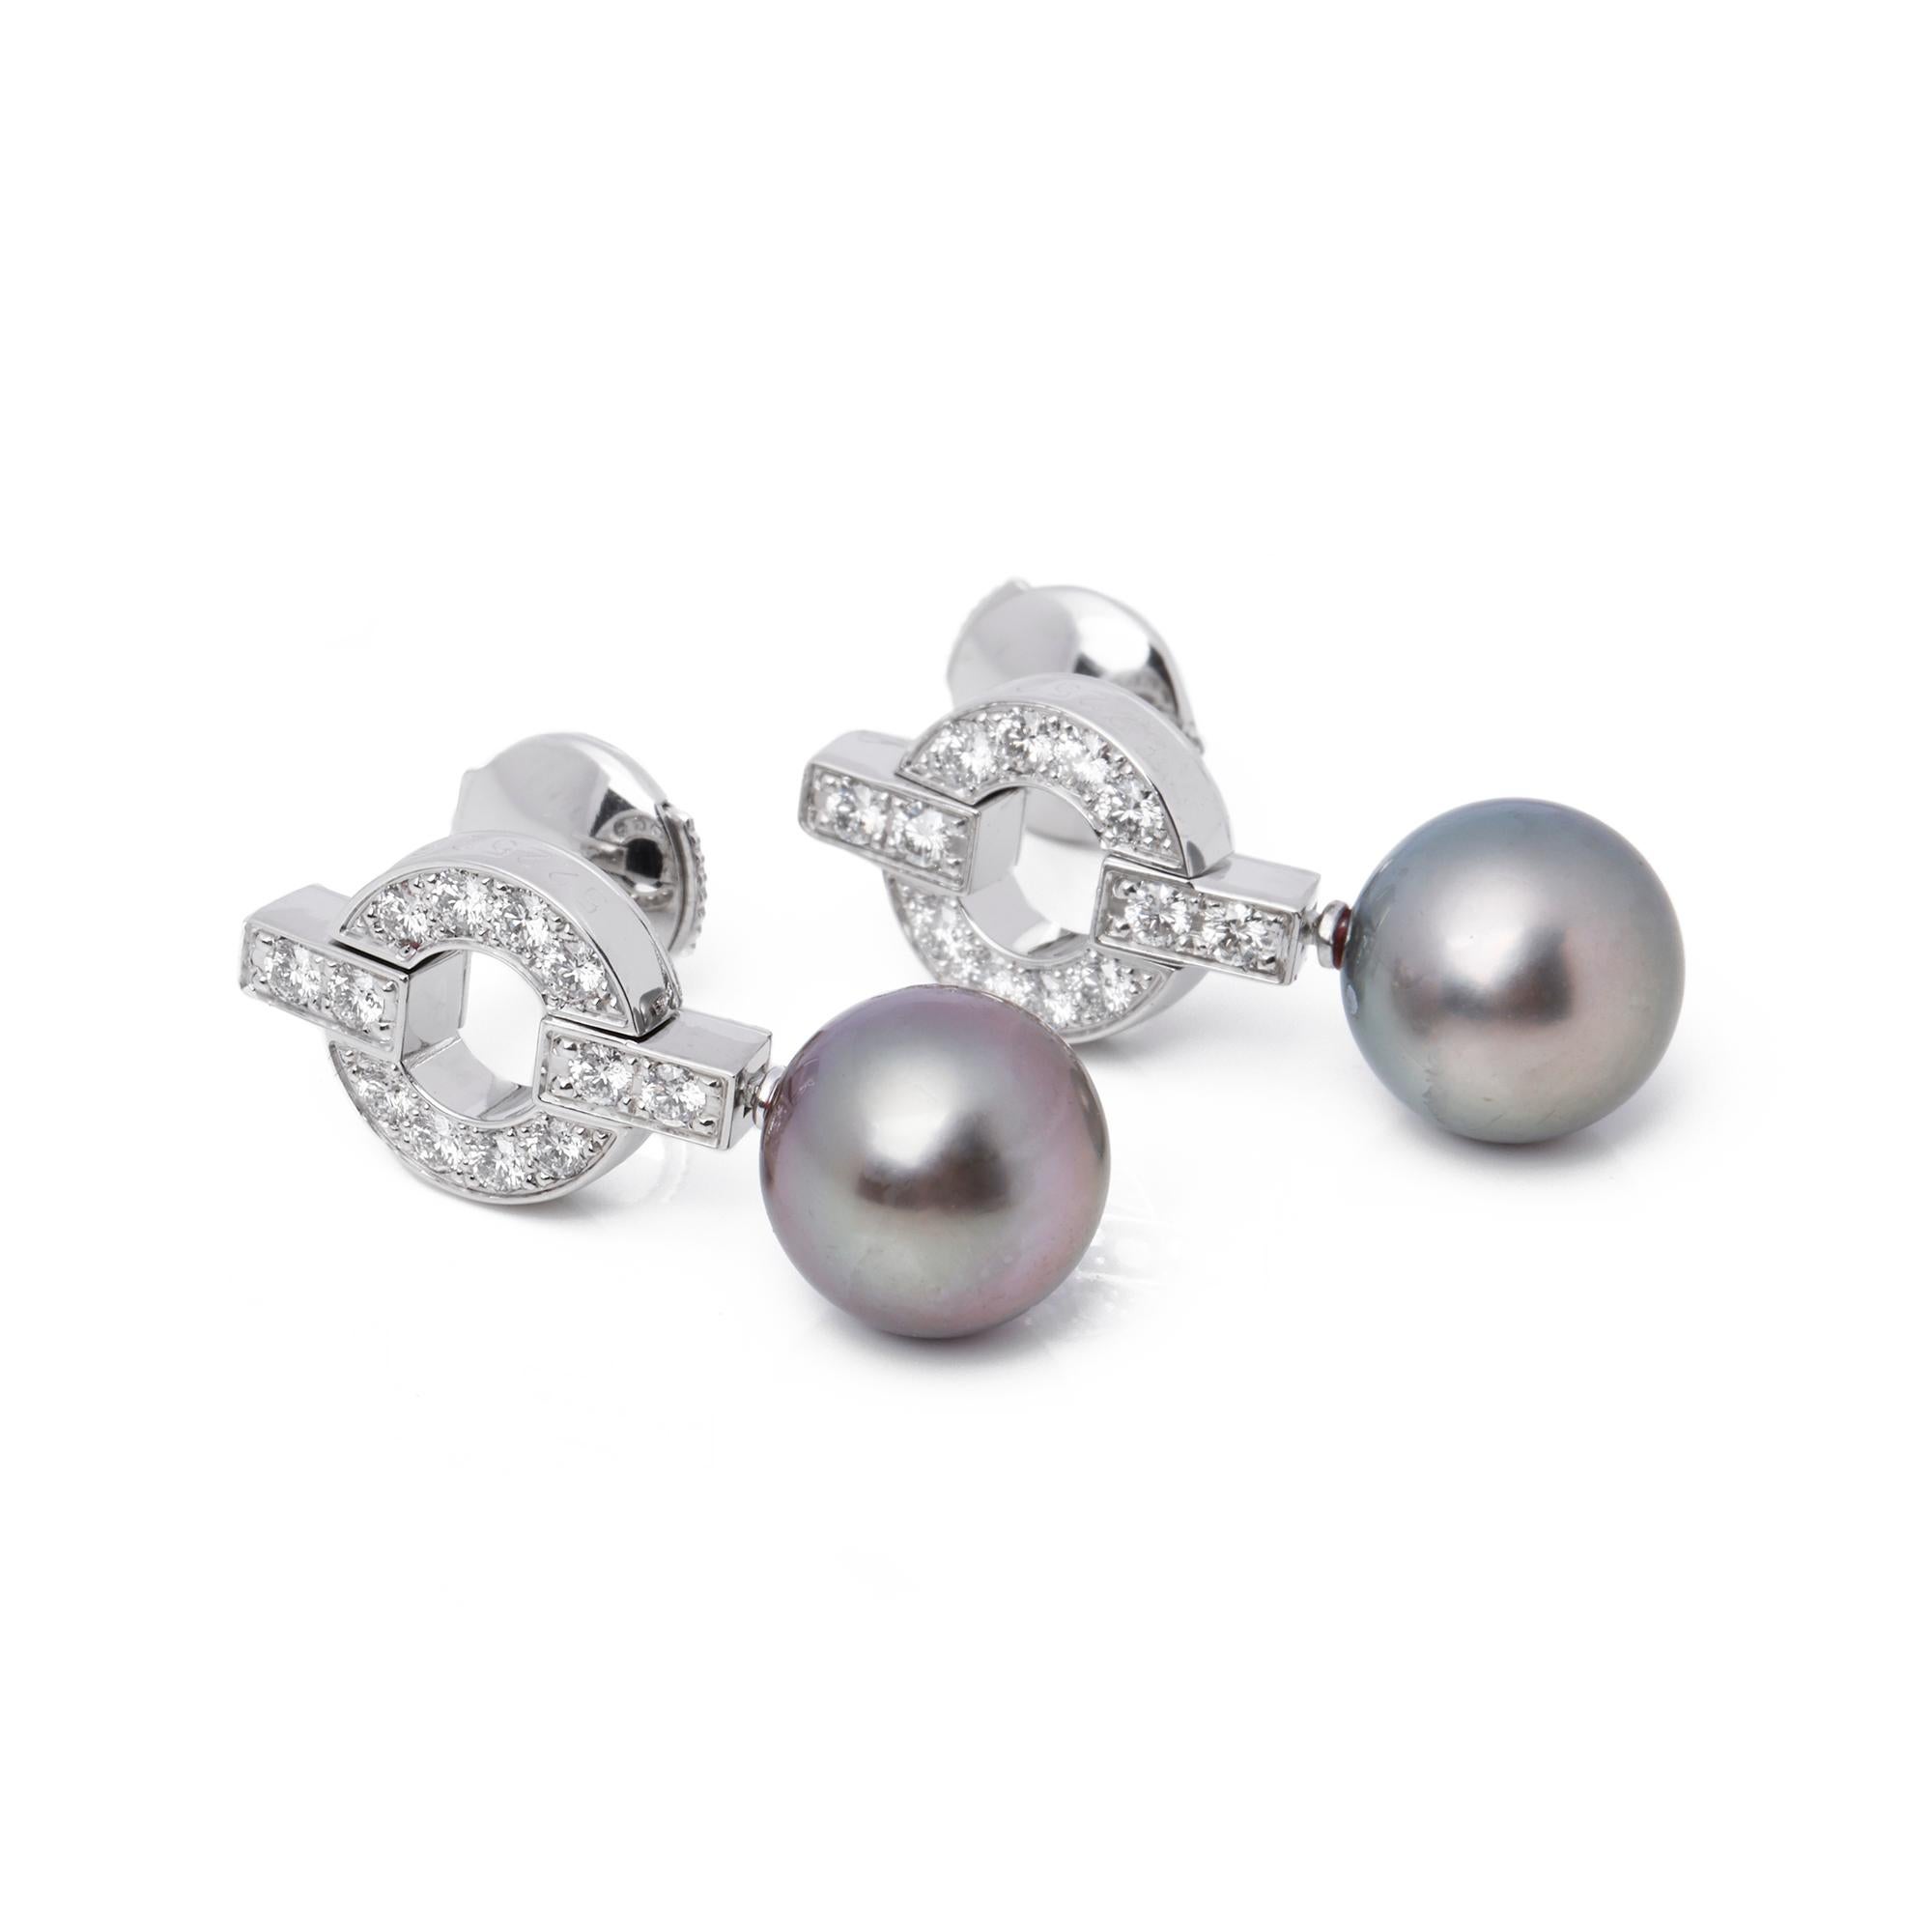 These earrings from Cartier's Himalia collection feature 24 round brilliant cut diamonds, totalling 0.42ct made in 18ct white gold. They also feature a single round Tahitian pearl each, measuring 9.5mm. Accompanied with it's original Cartier box and